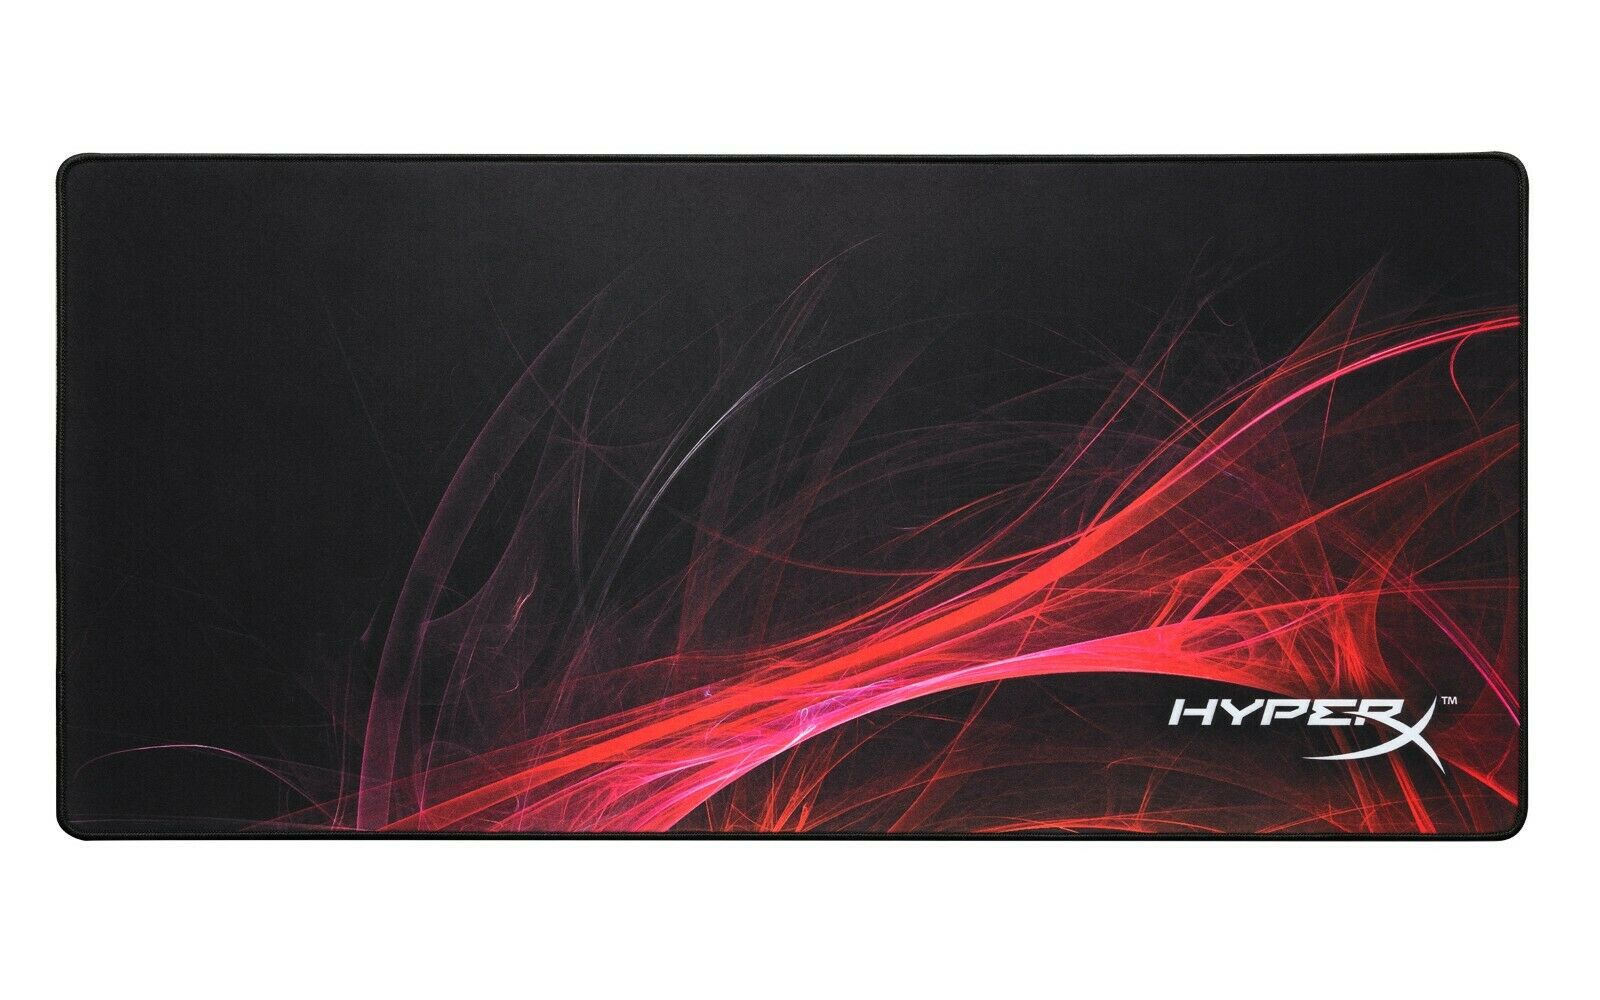 Hyperx Fury S Speed - Pro Gaming Mouse Pad, Stitched Anti-fray Edges, X-large